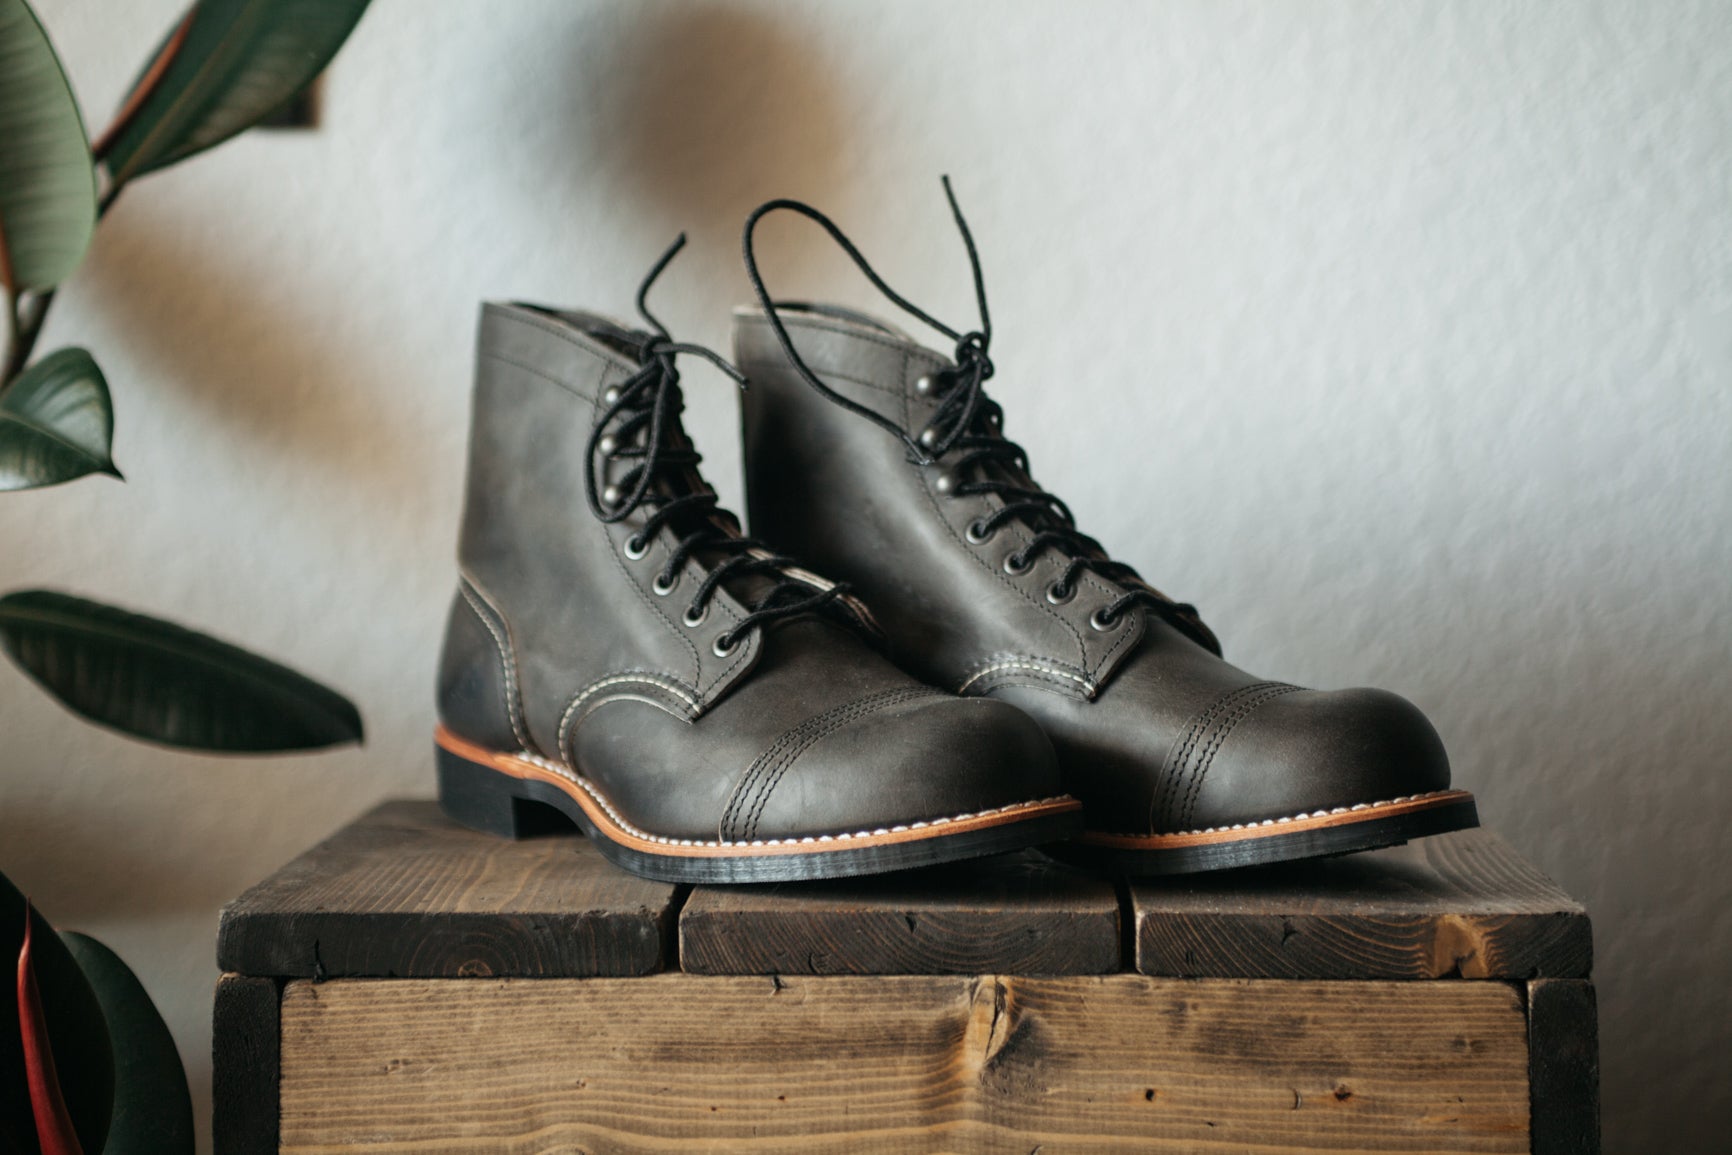 red wing iron ranger charcoal rough and tough